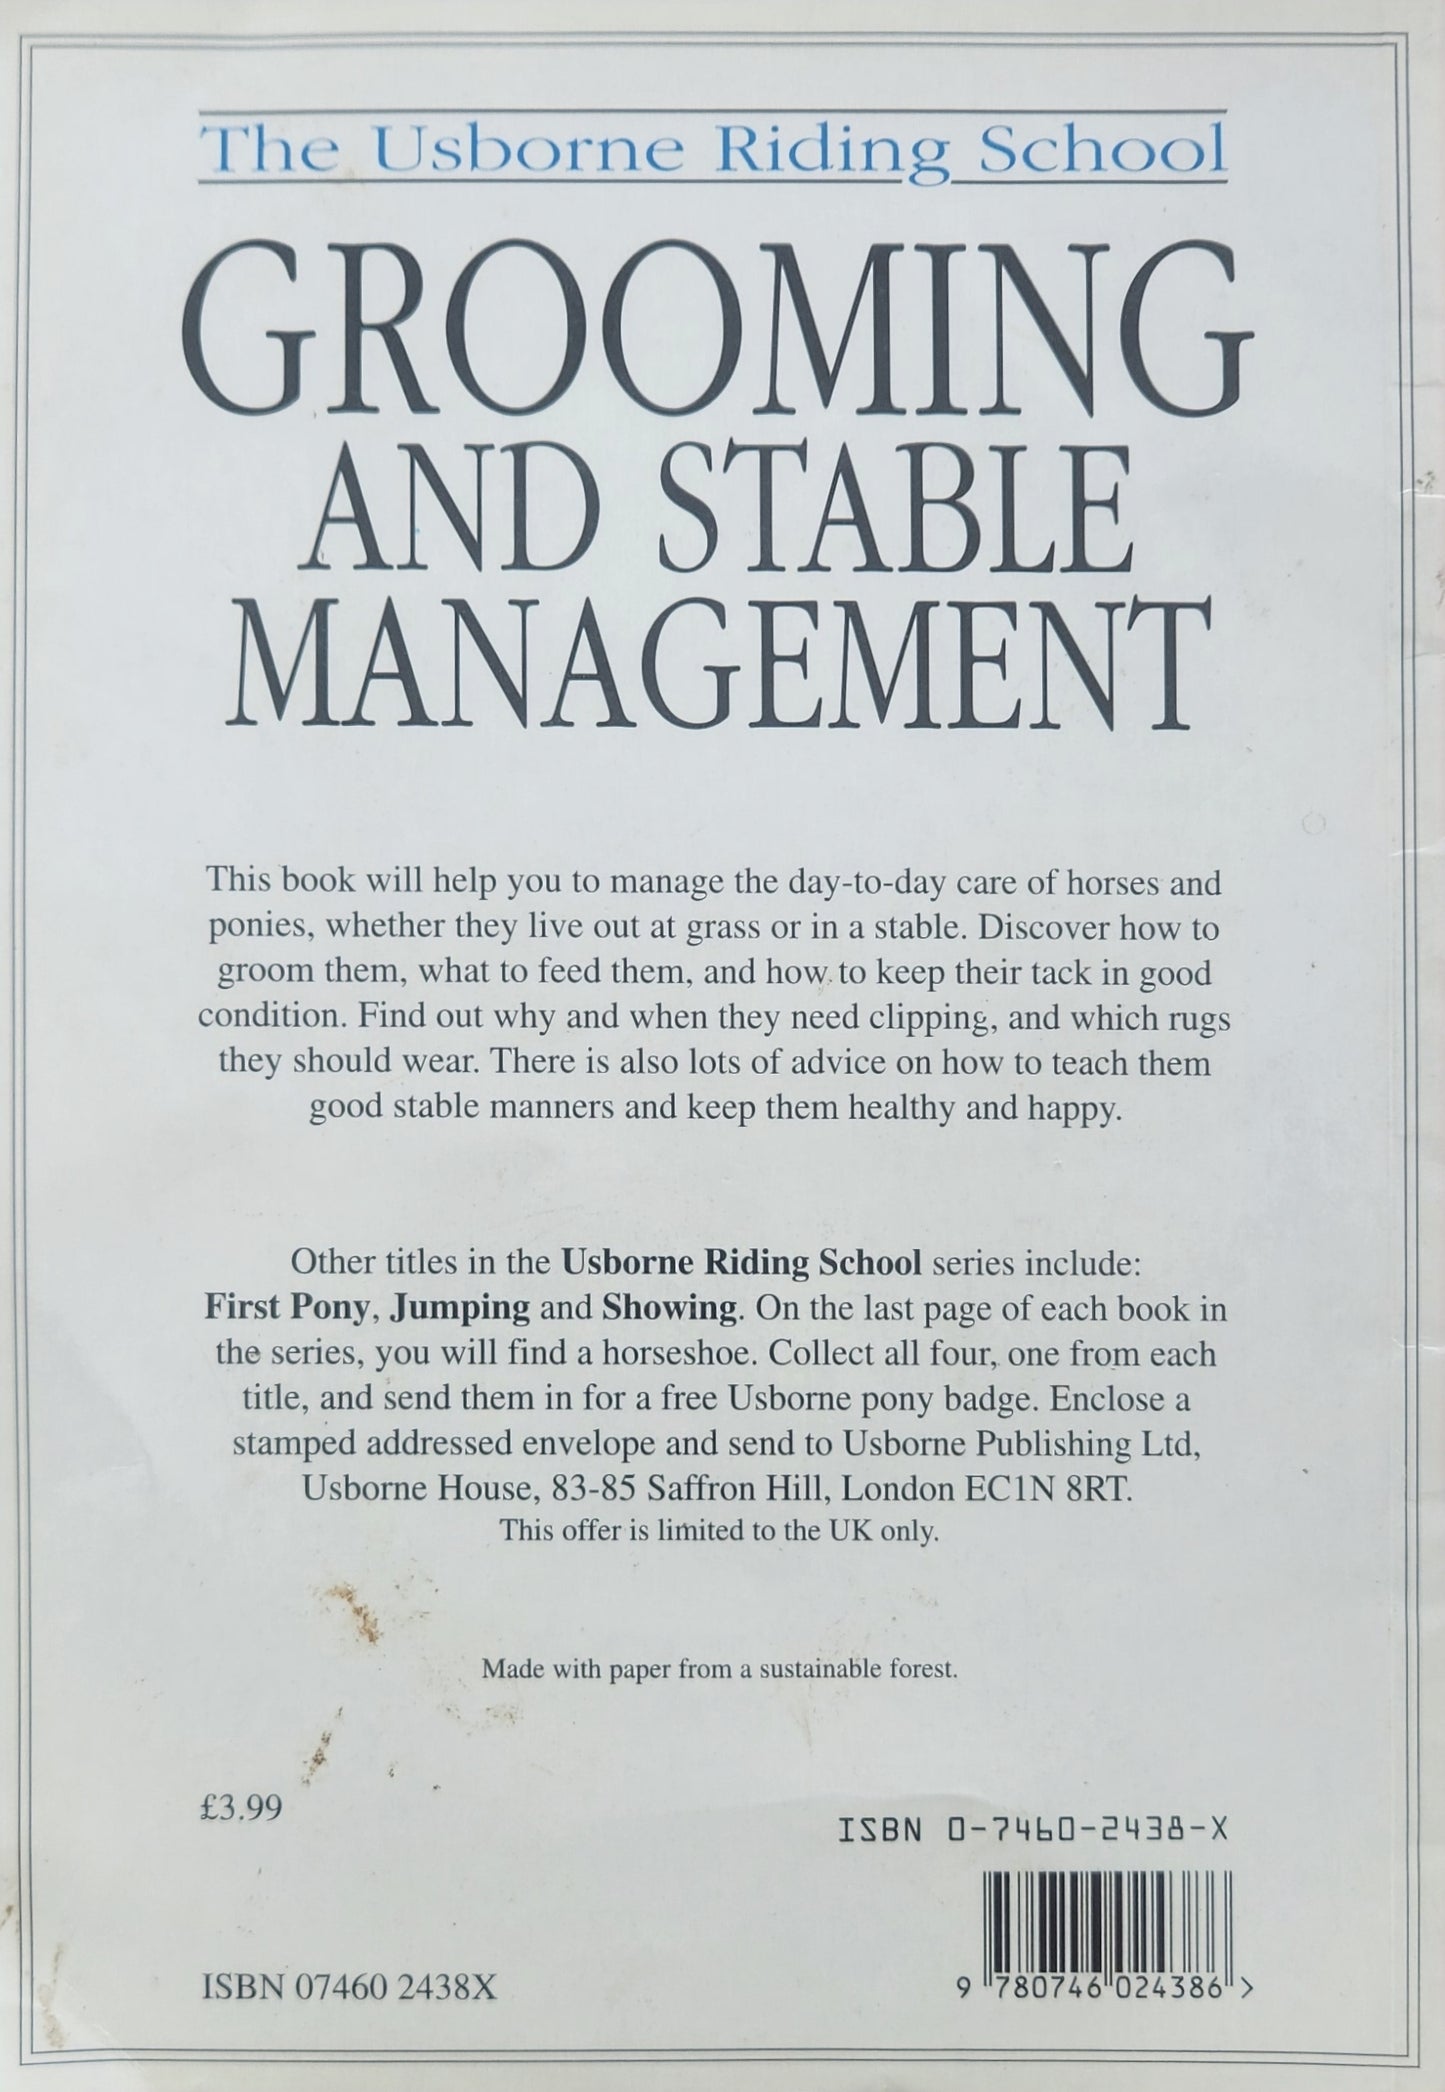 Grooming and Stable Management